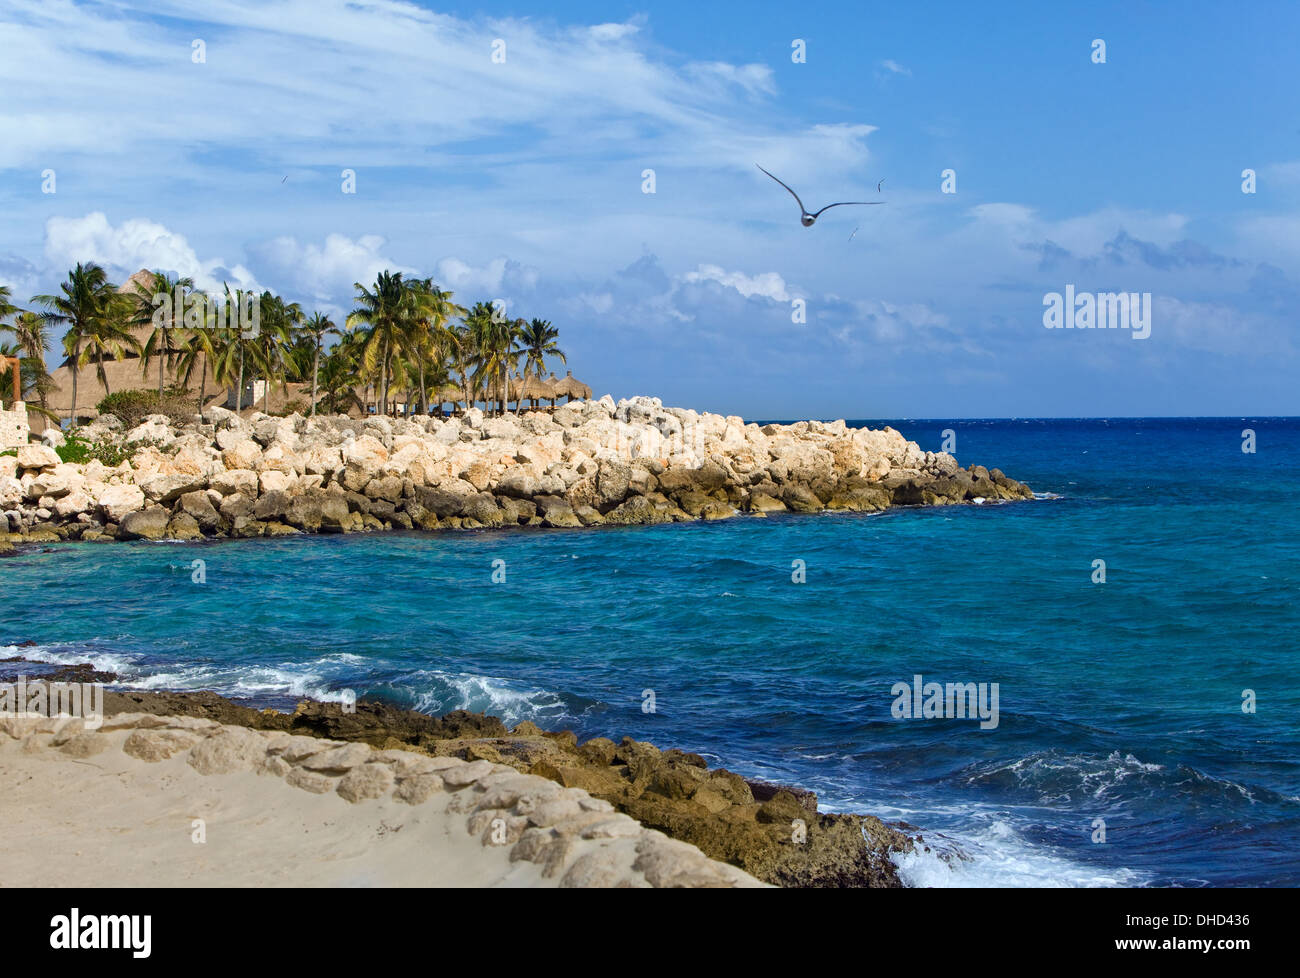 Mexico, park of Shkaret.Rock with palm trees Stock Photo